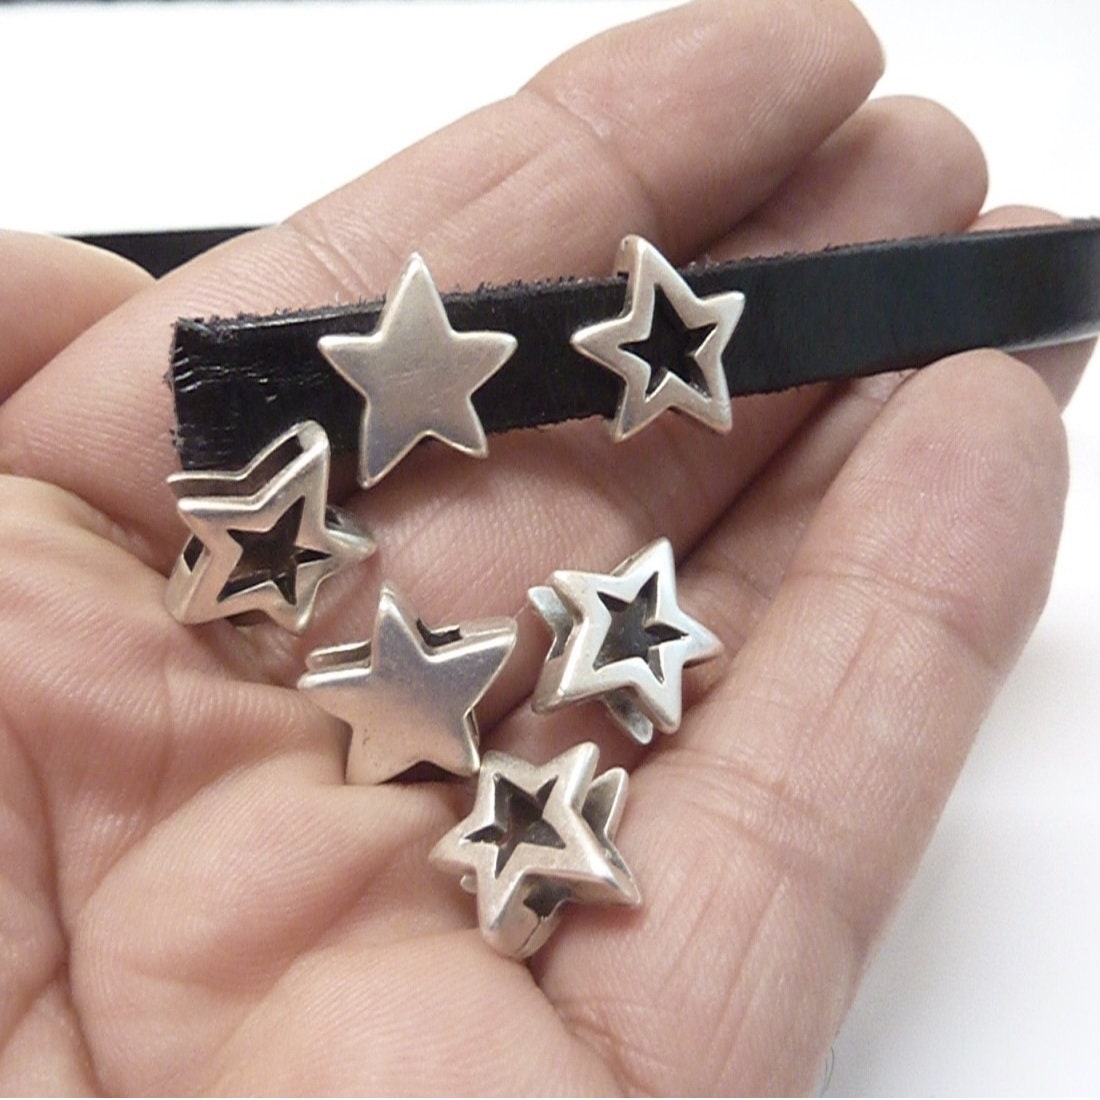 Excited to share the latest addition to my shop: Star Slider Beads for Flat Leather and Cord Bracelet, Antique Silver Plated etsy.me/3FFeoqN #silver #valentinesday #beading #starscelestial #friendshipbracelet #braceletconnectors #forbracelet #braceletcomponent